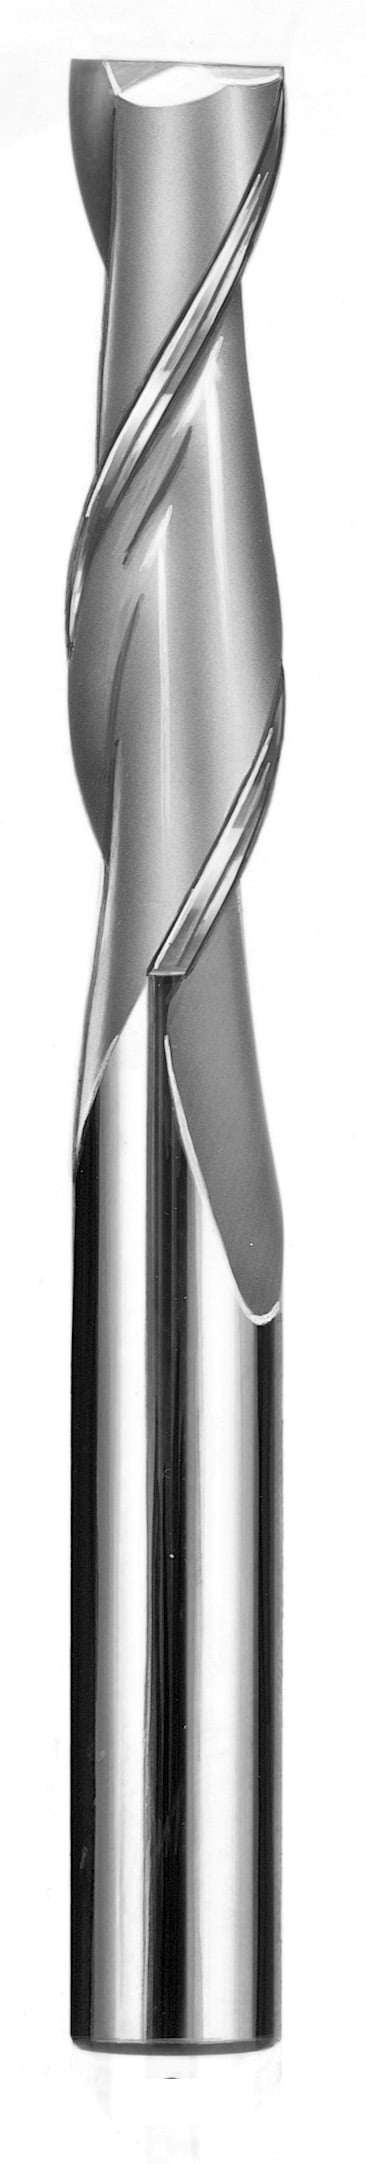 1/2" Dia, 2 Flute, Square End End Mill - 33311